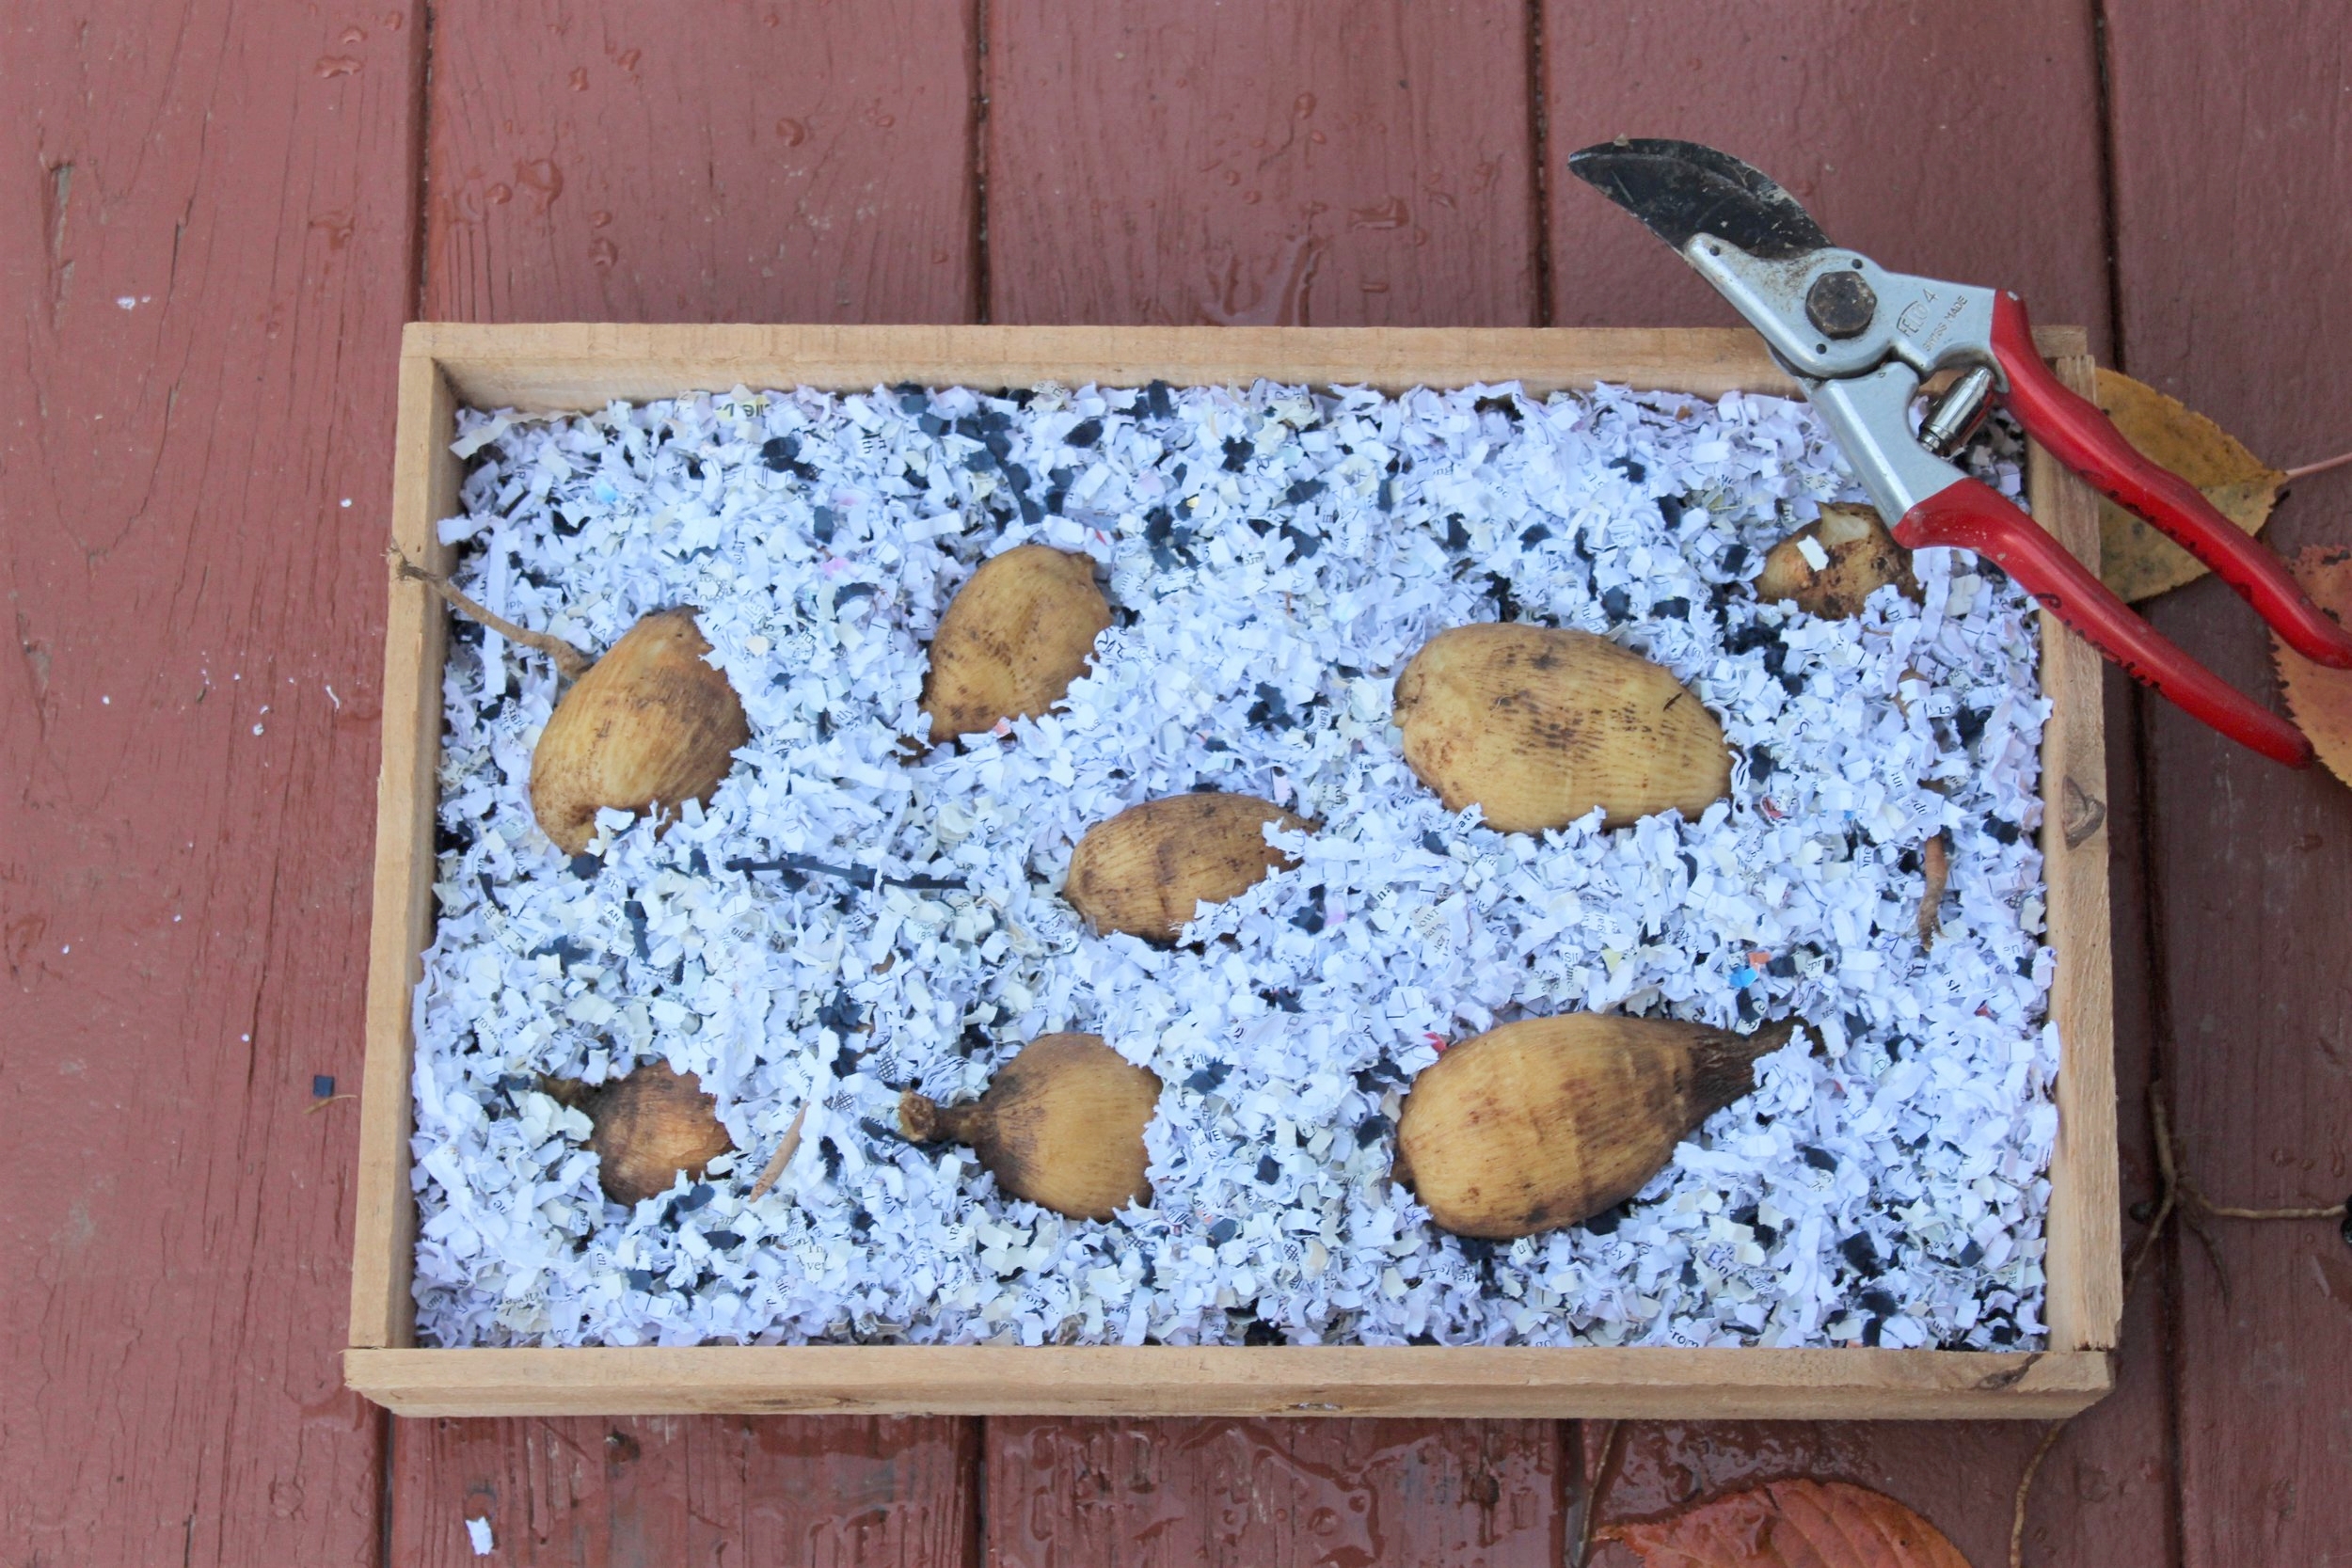 Storing. - There are a couple of ways to store your tubers. This box is an old seed tray with wooden slats on the bottom and sides for air flow. Shredded paper works to reduce evaporation and drying out of tubers. Cardboard boxes or paper bags can be used, and peat moss, coarse sand, sawdust, wood shavings or vermiculite work instead of shredded paper. There's a balance on keeping the tubers dry without drying them out. It's best to err on the dry side.